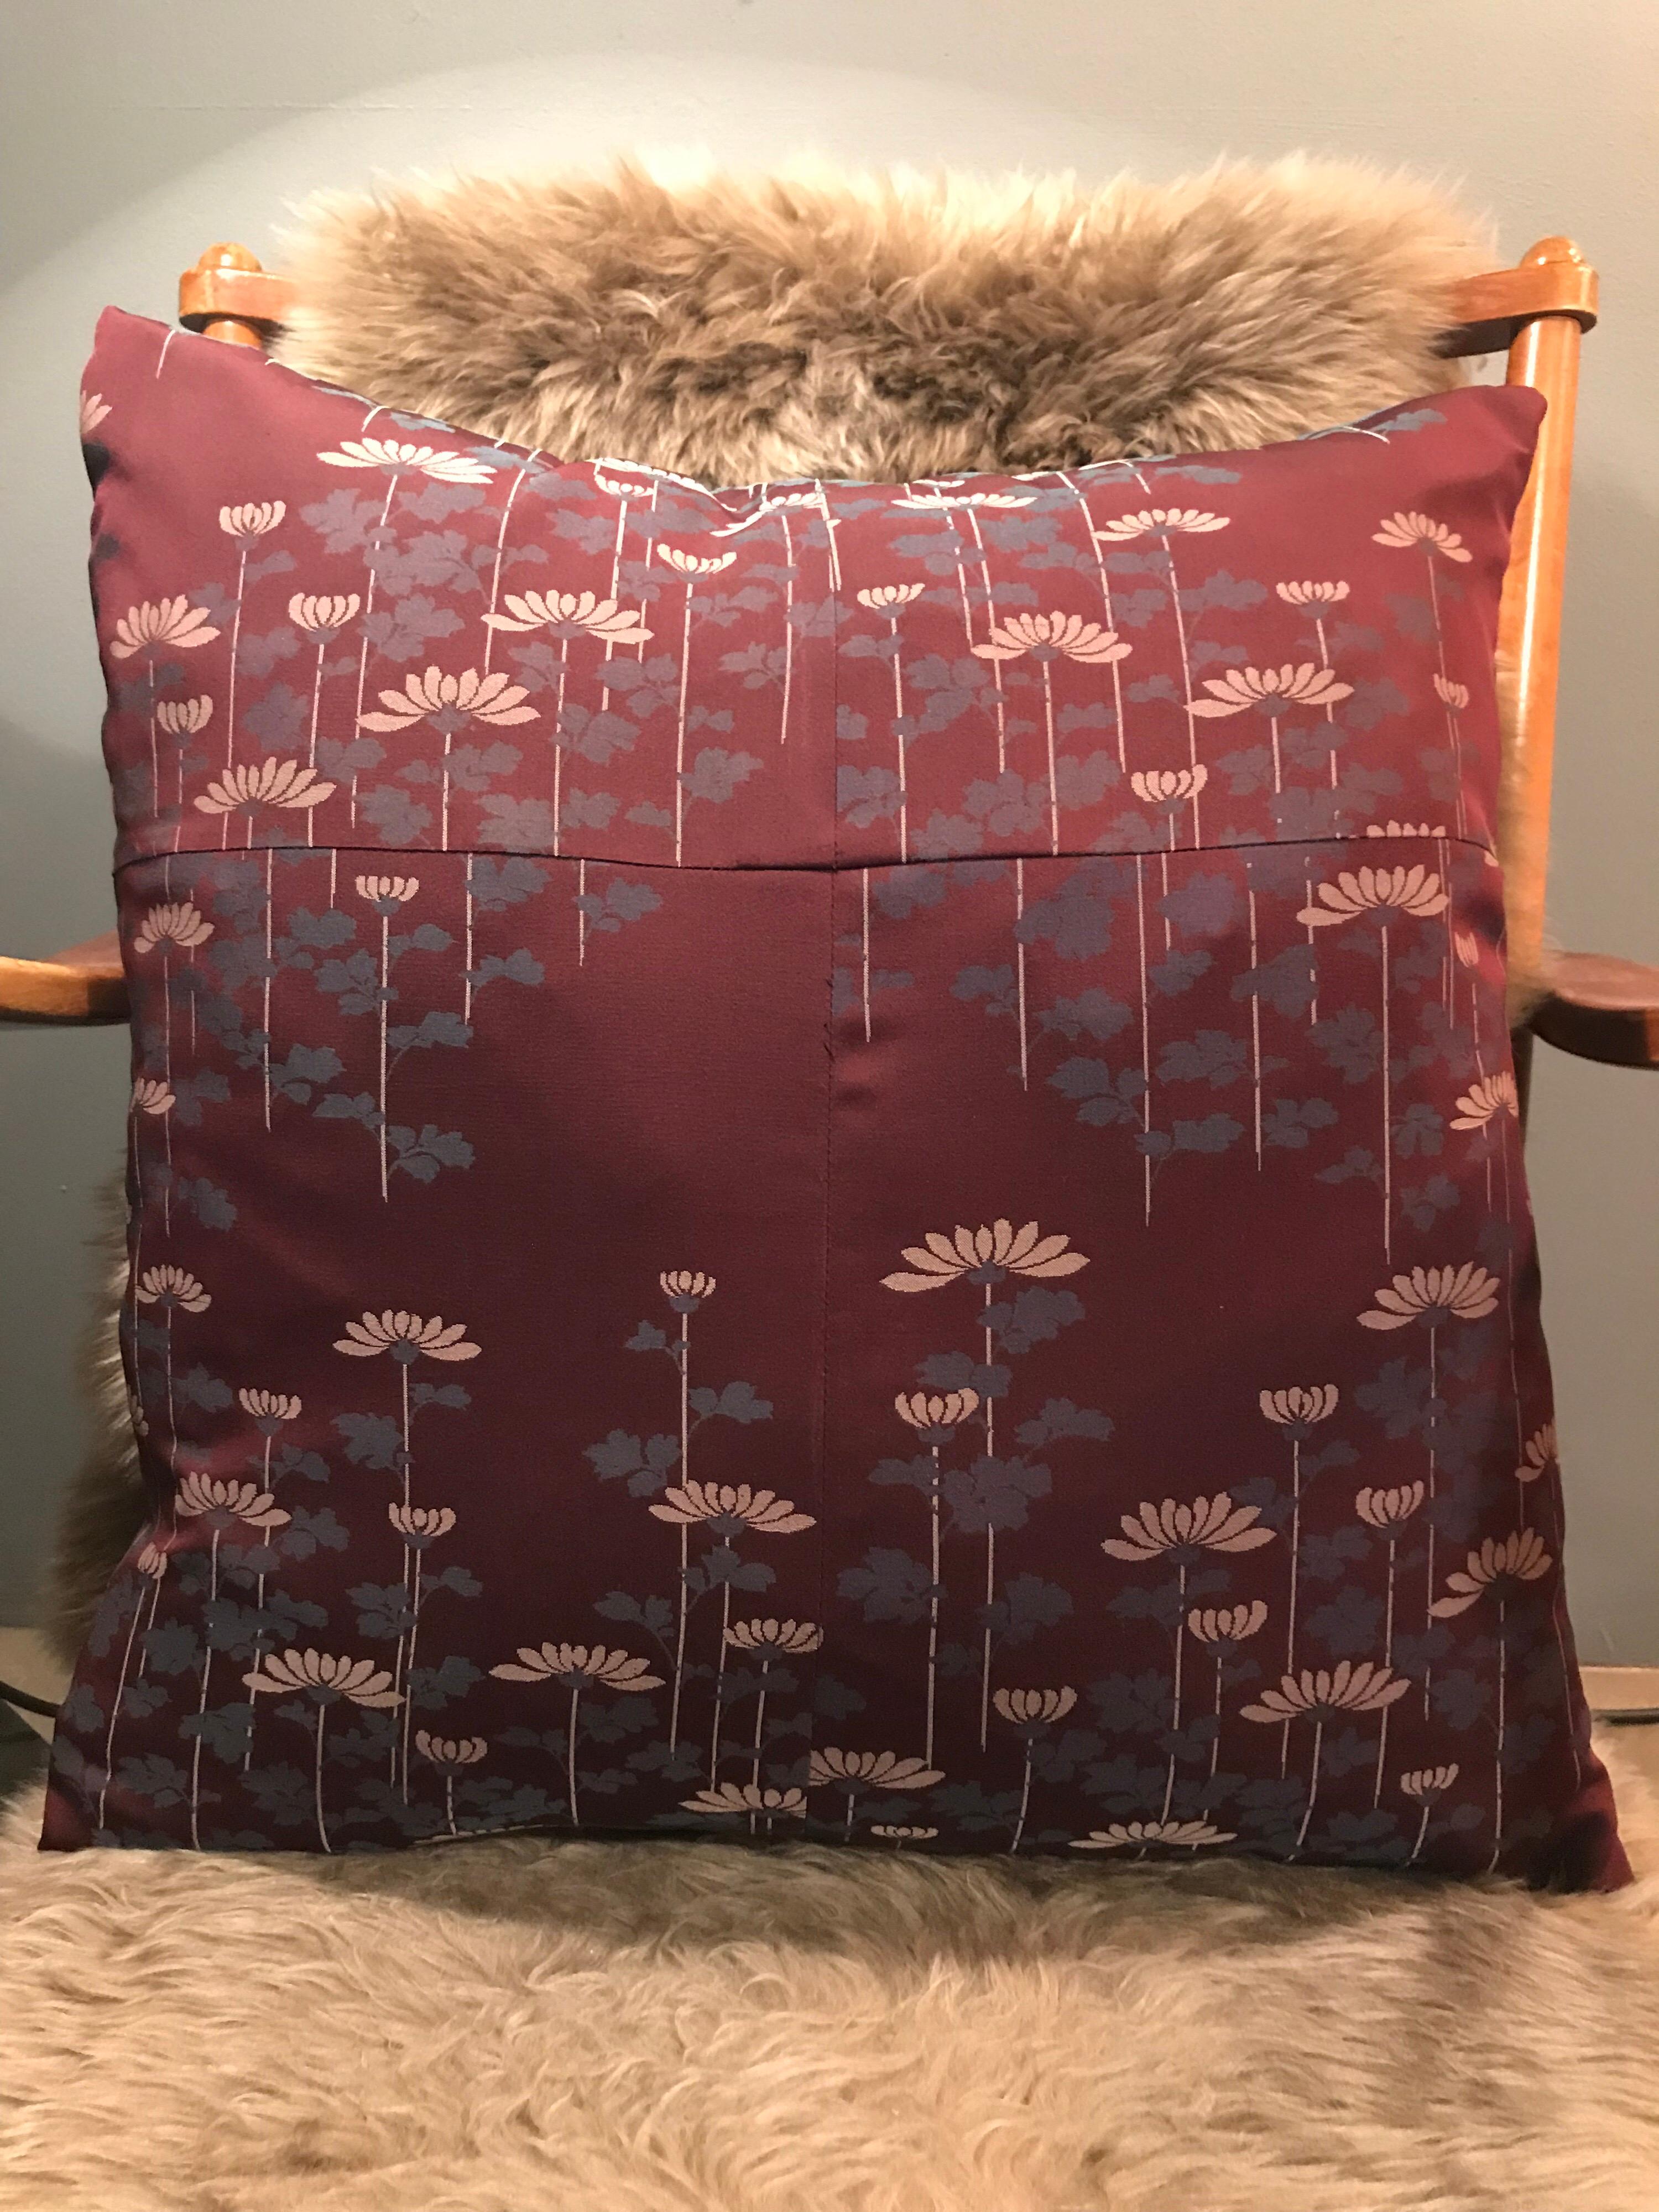 Set of 4 cushions made from vintage kimonos.
Great interior design pieces with wonderful colors and patterns.
Filled with duck down and measuring 45 x 45 cm.